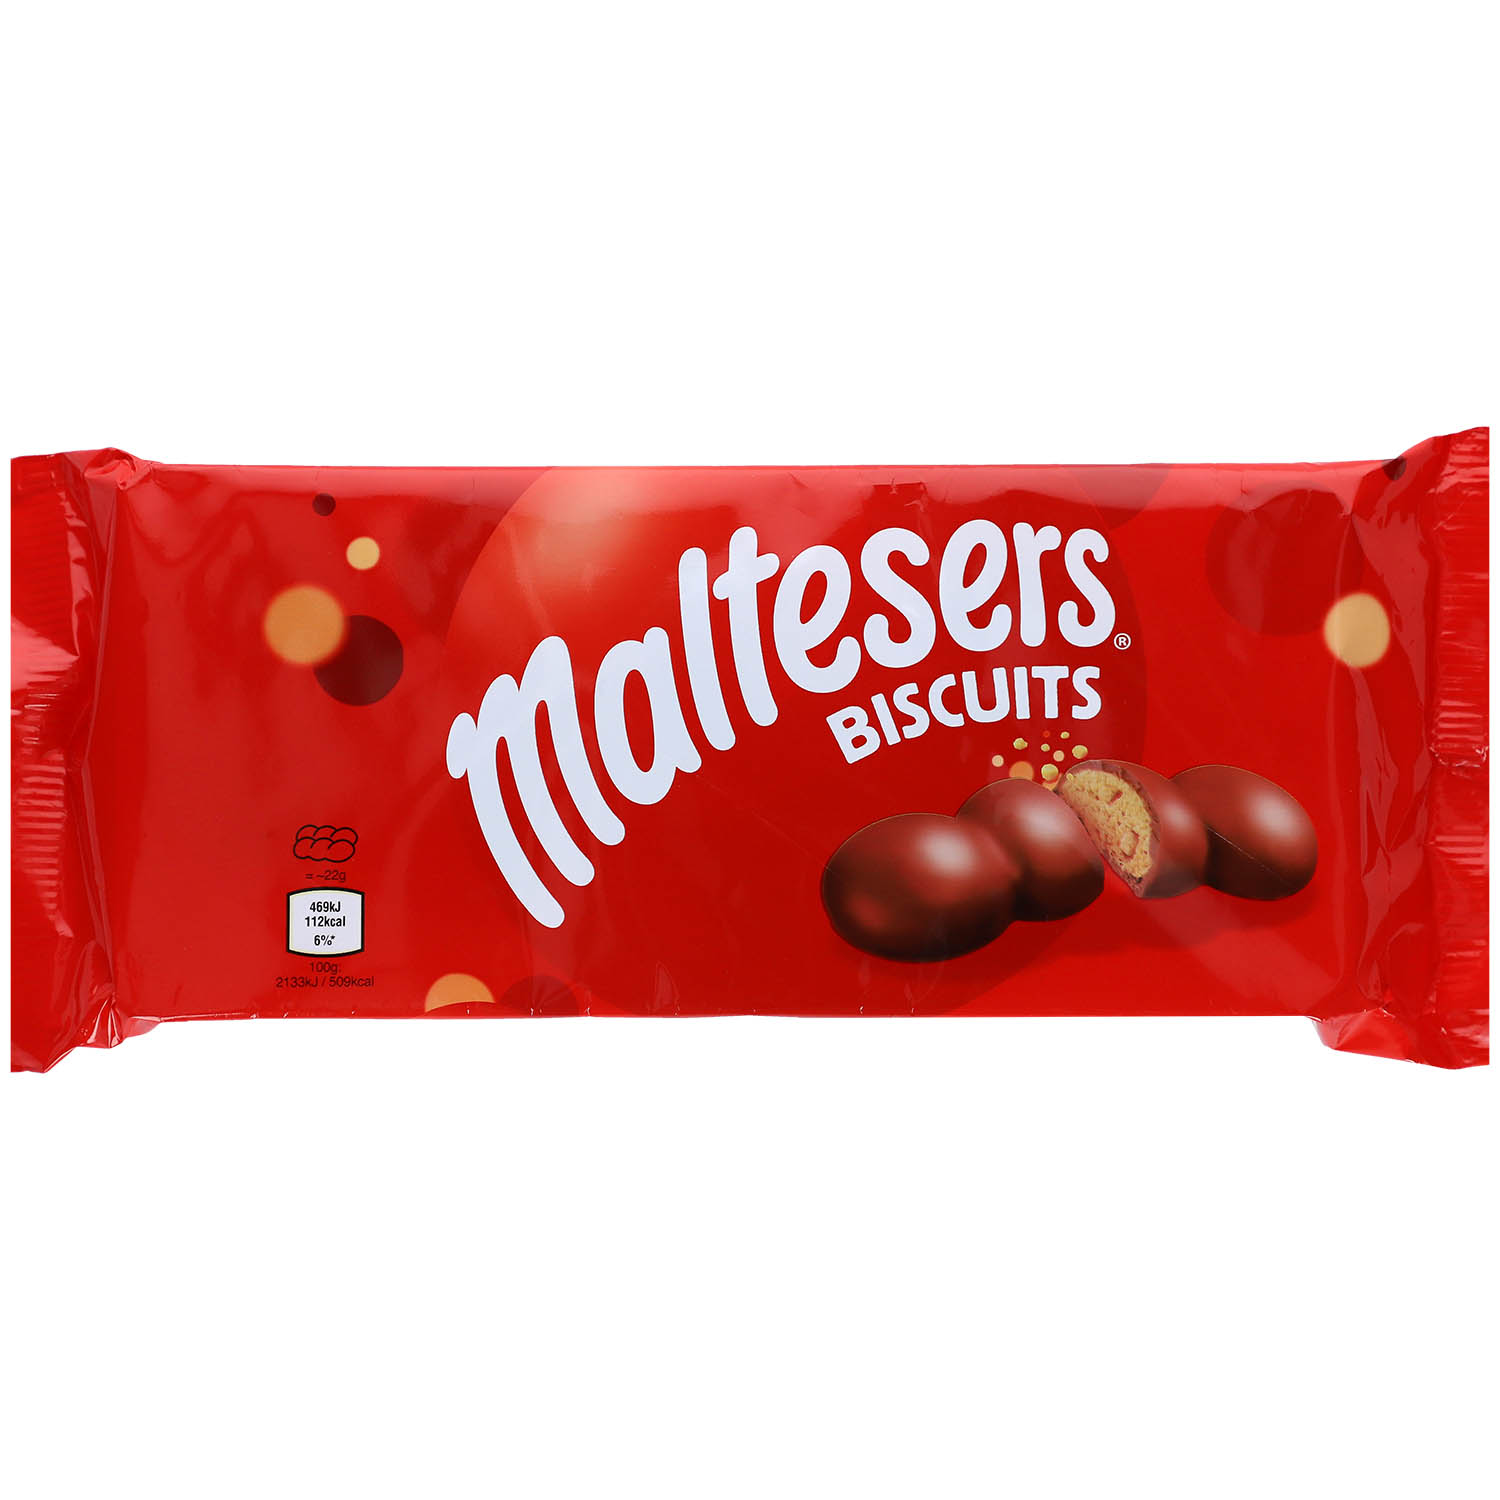 https://www.worldofsweets.de/out/pictures/master/product/1/maltesers-biscuits-110g-no1-5322.jpg